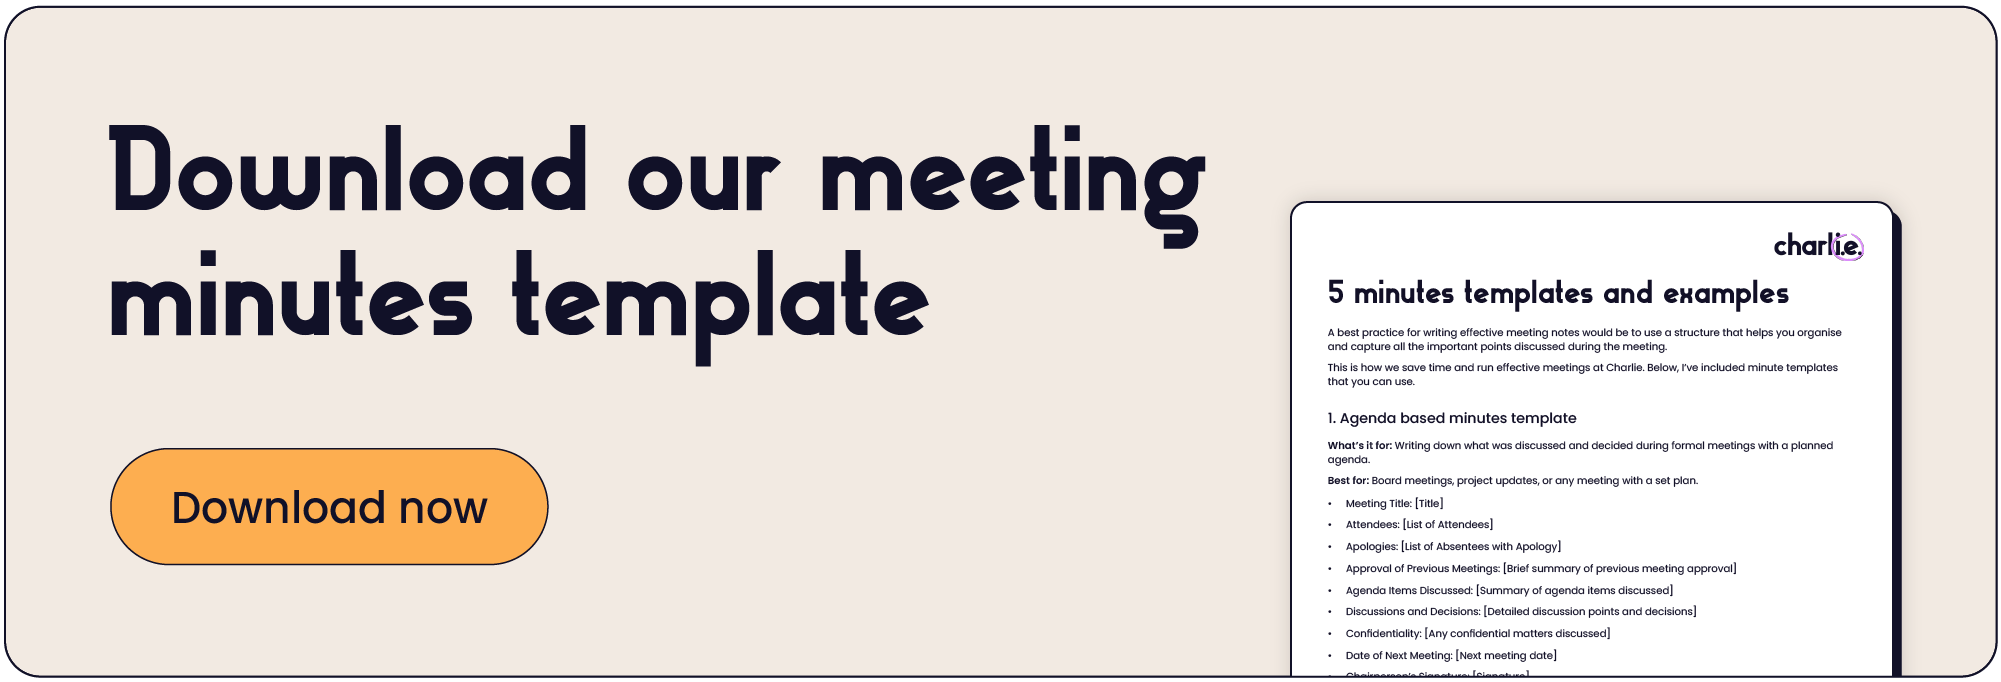 Download our meetings minutes template.webp